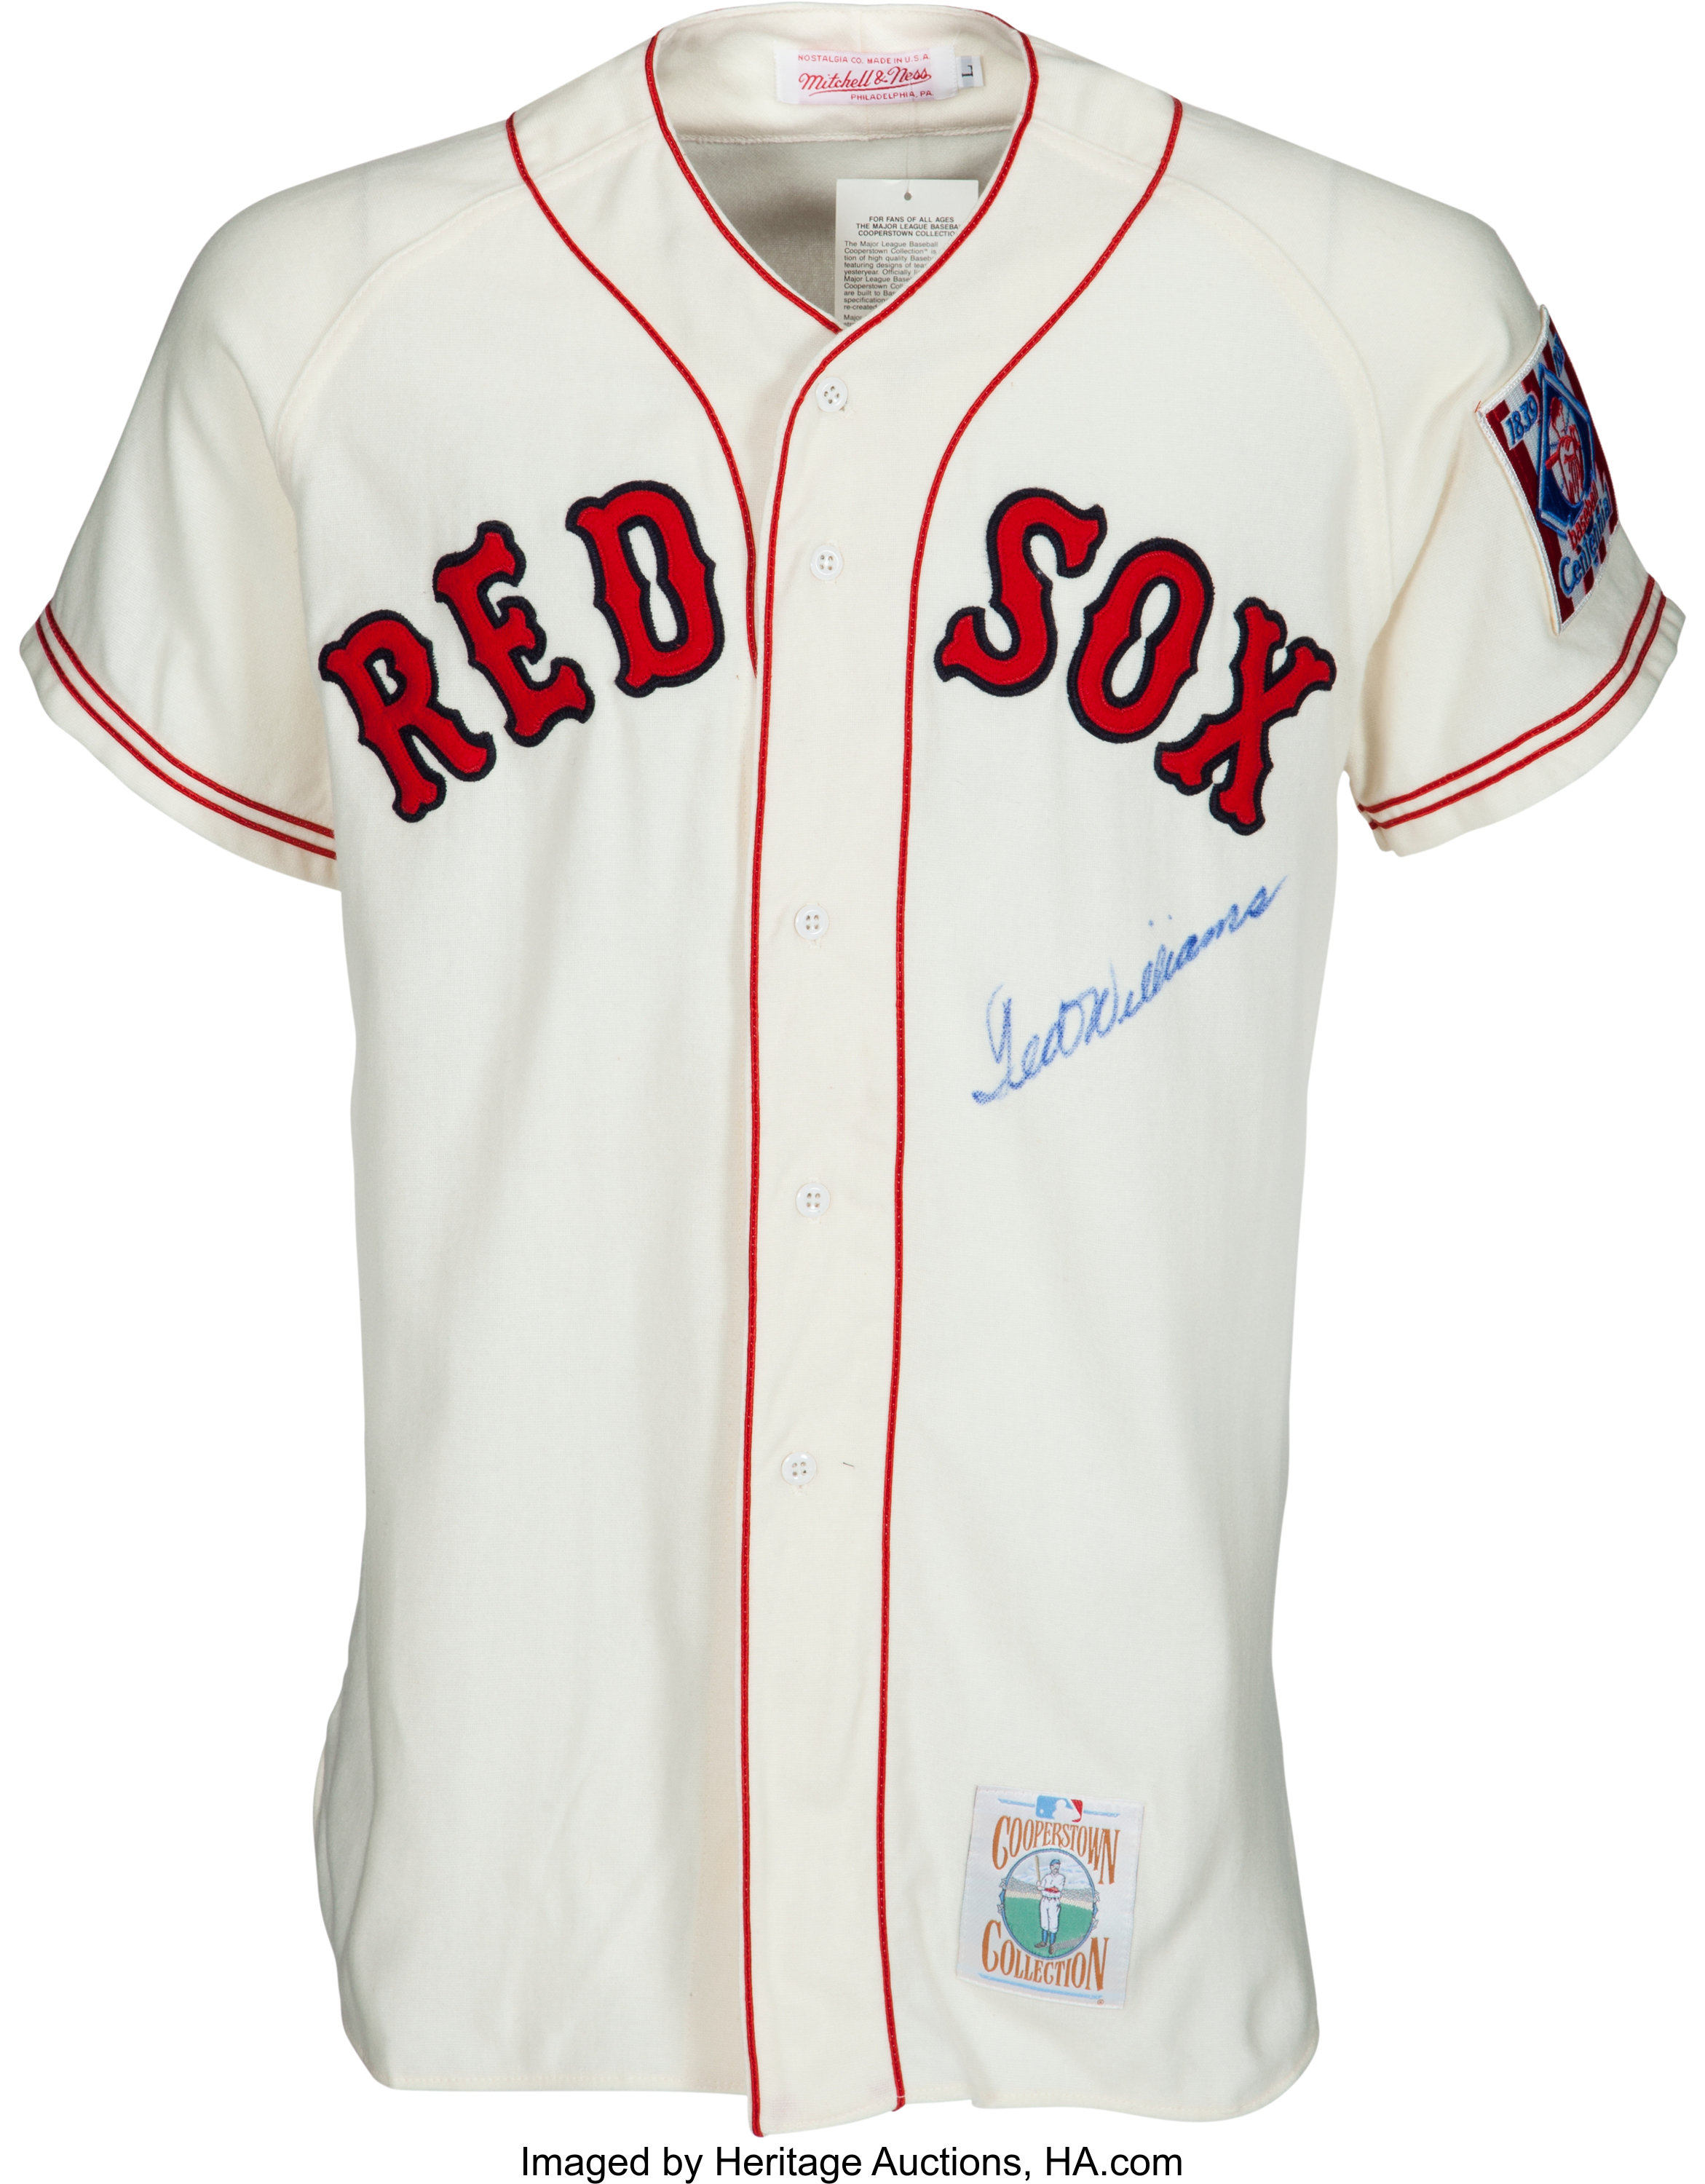 1990's Ted Williams Signed Boston Red Sox Jersey. Baseball